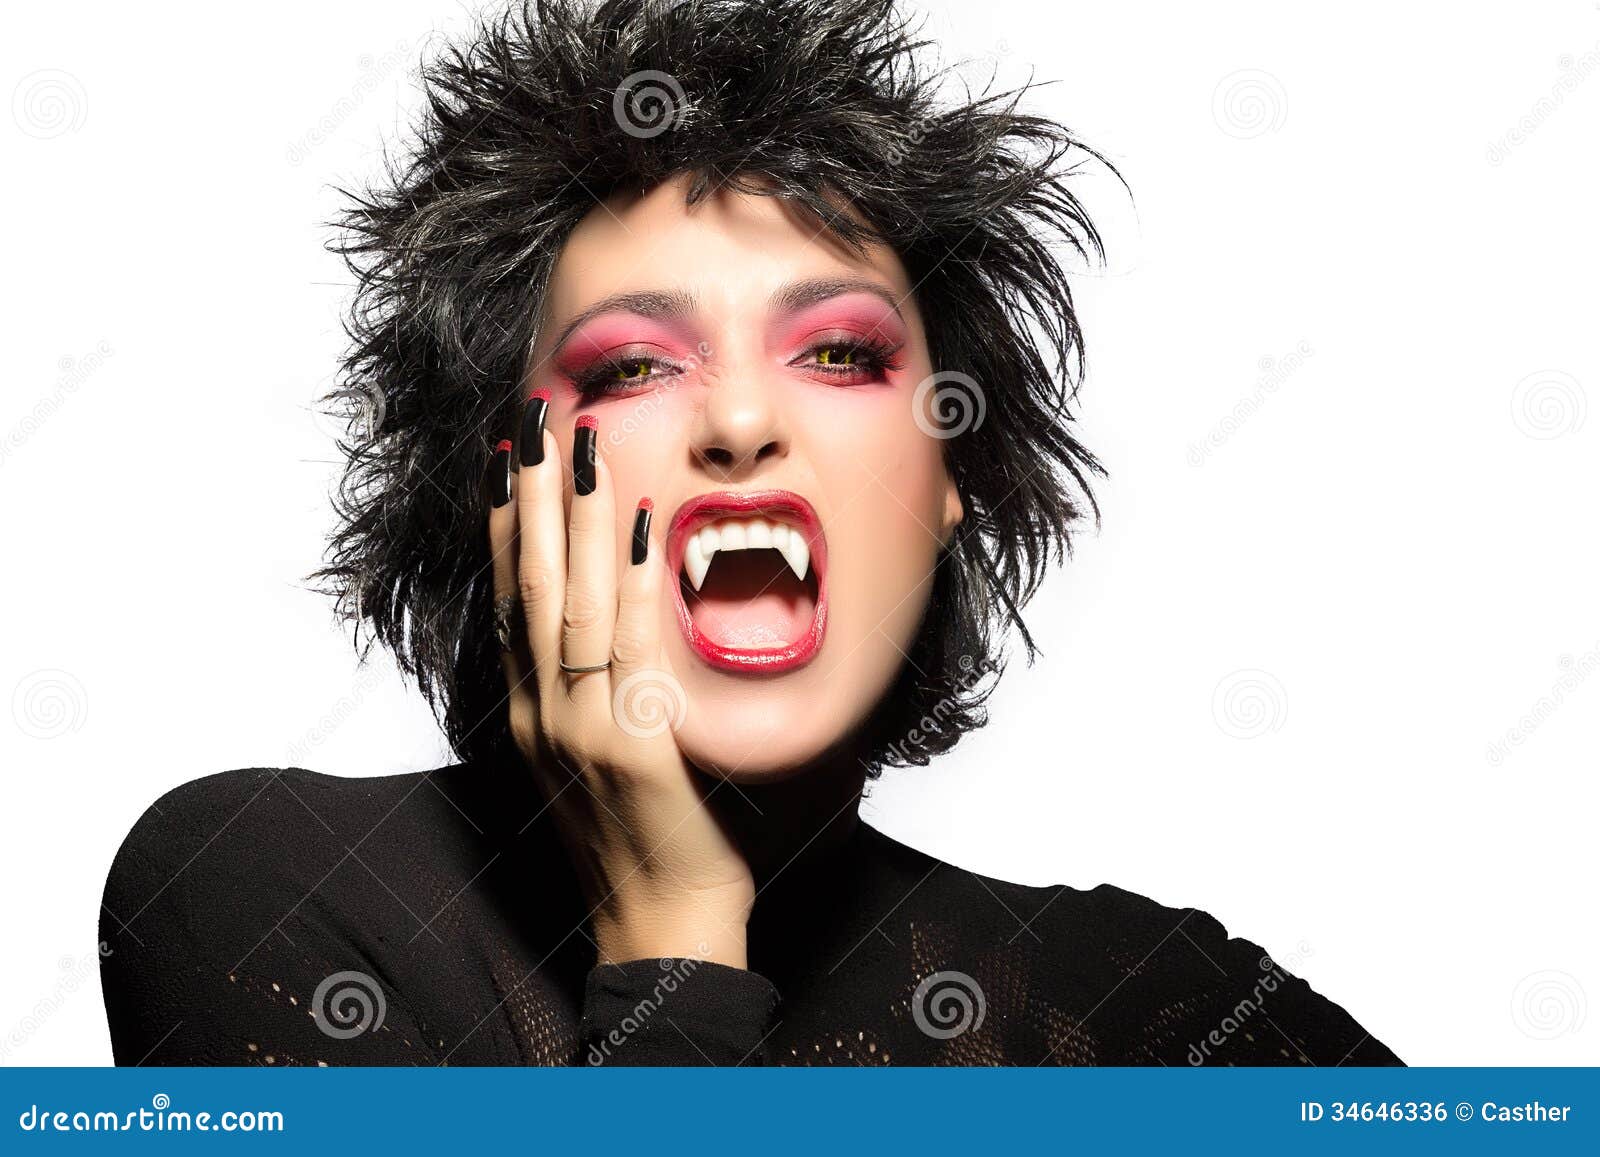 Beauty Gothic Girl. Vampire Makeup Stock Photo - Image of anger, death ...